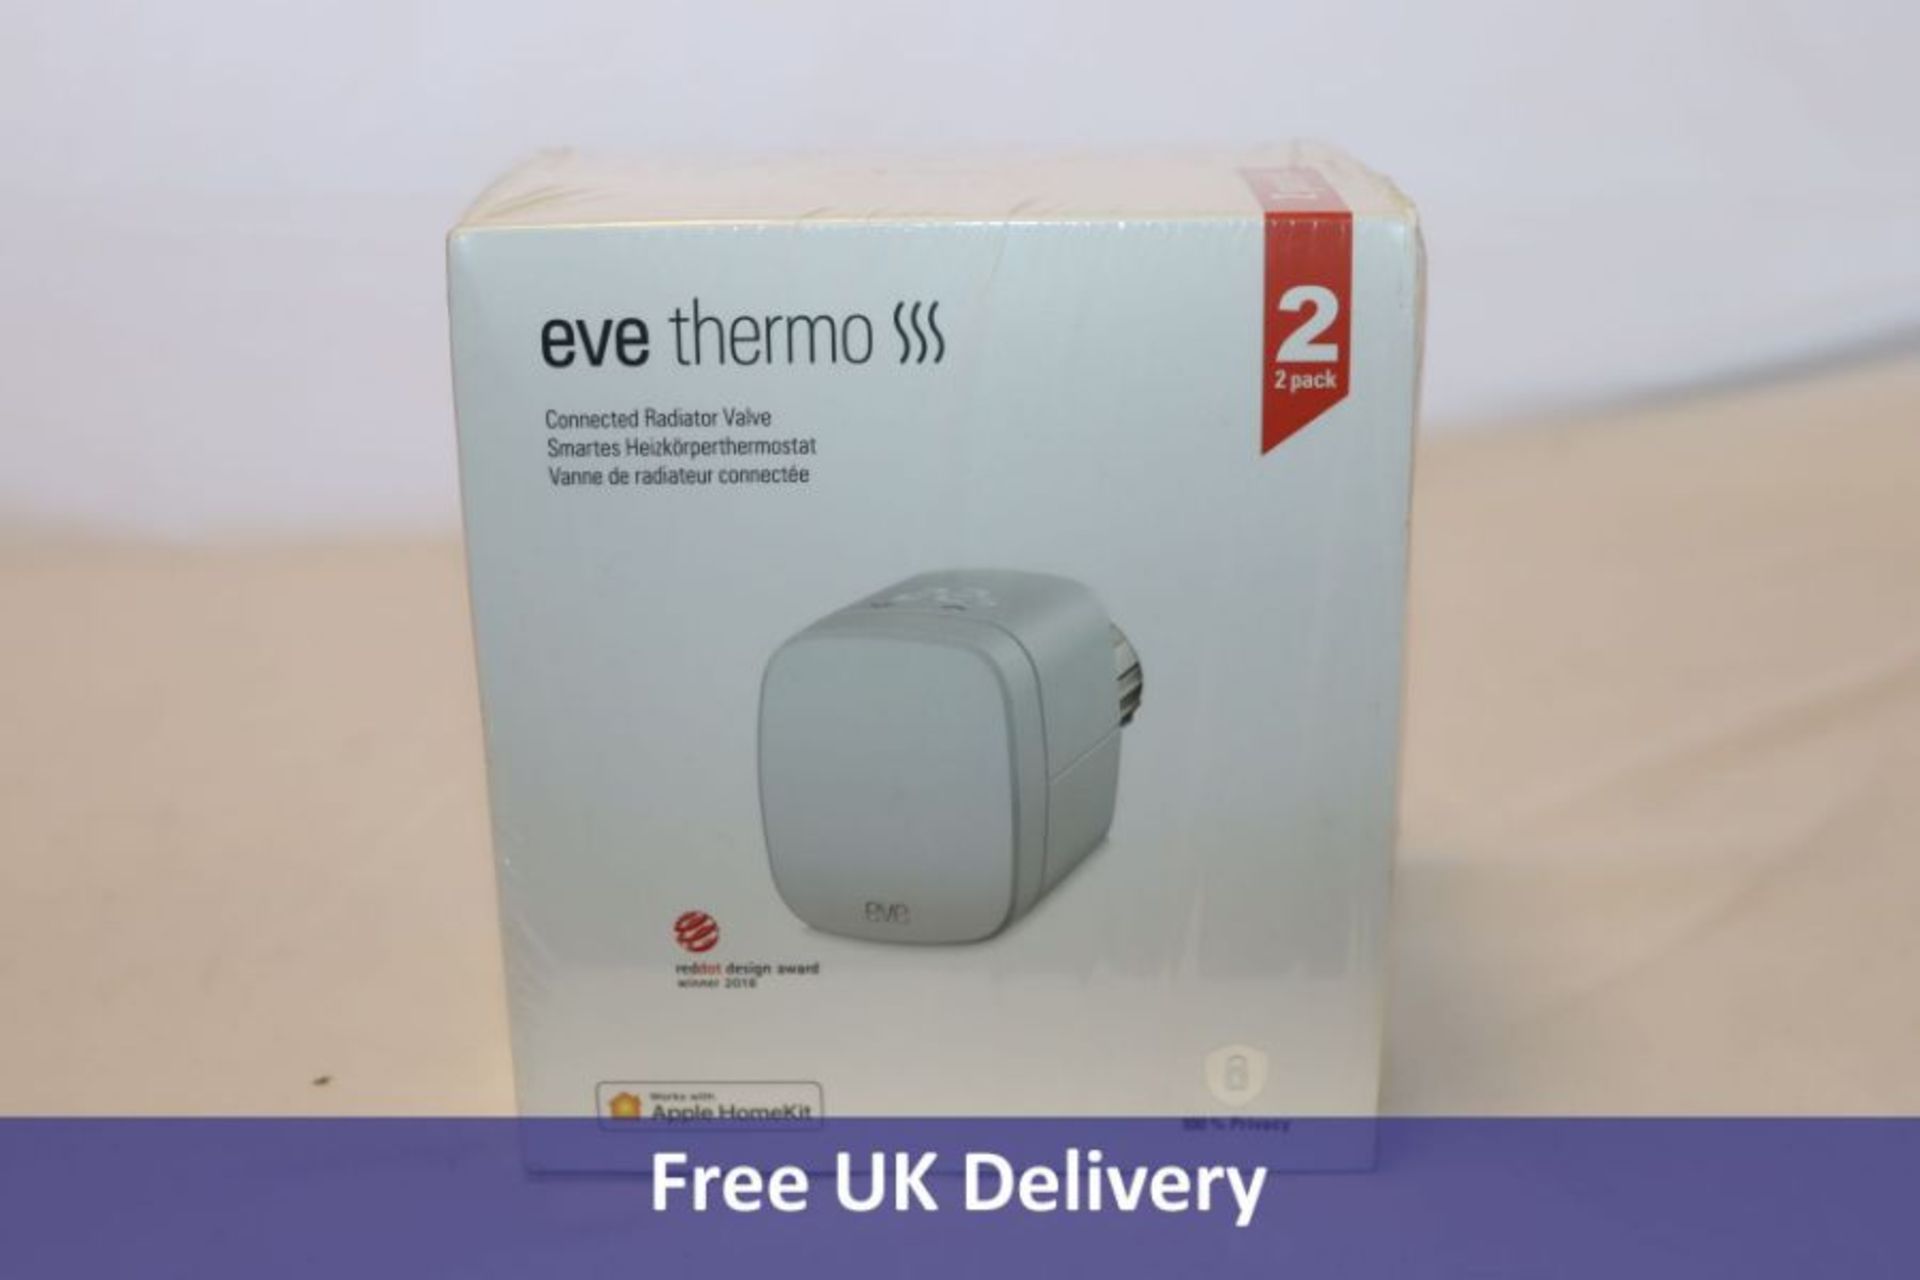 Two Eve Thermo Smart Radiator Valves